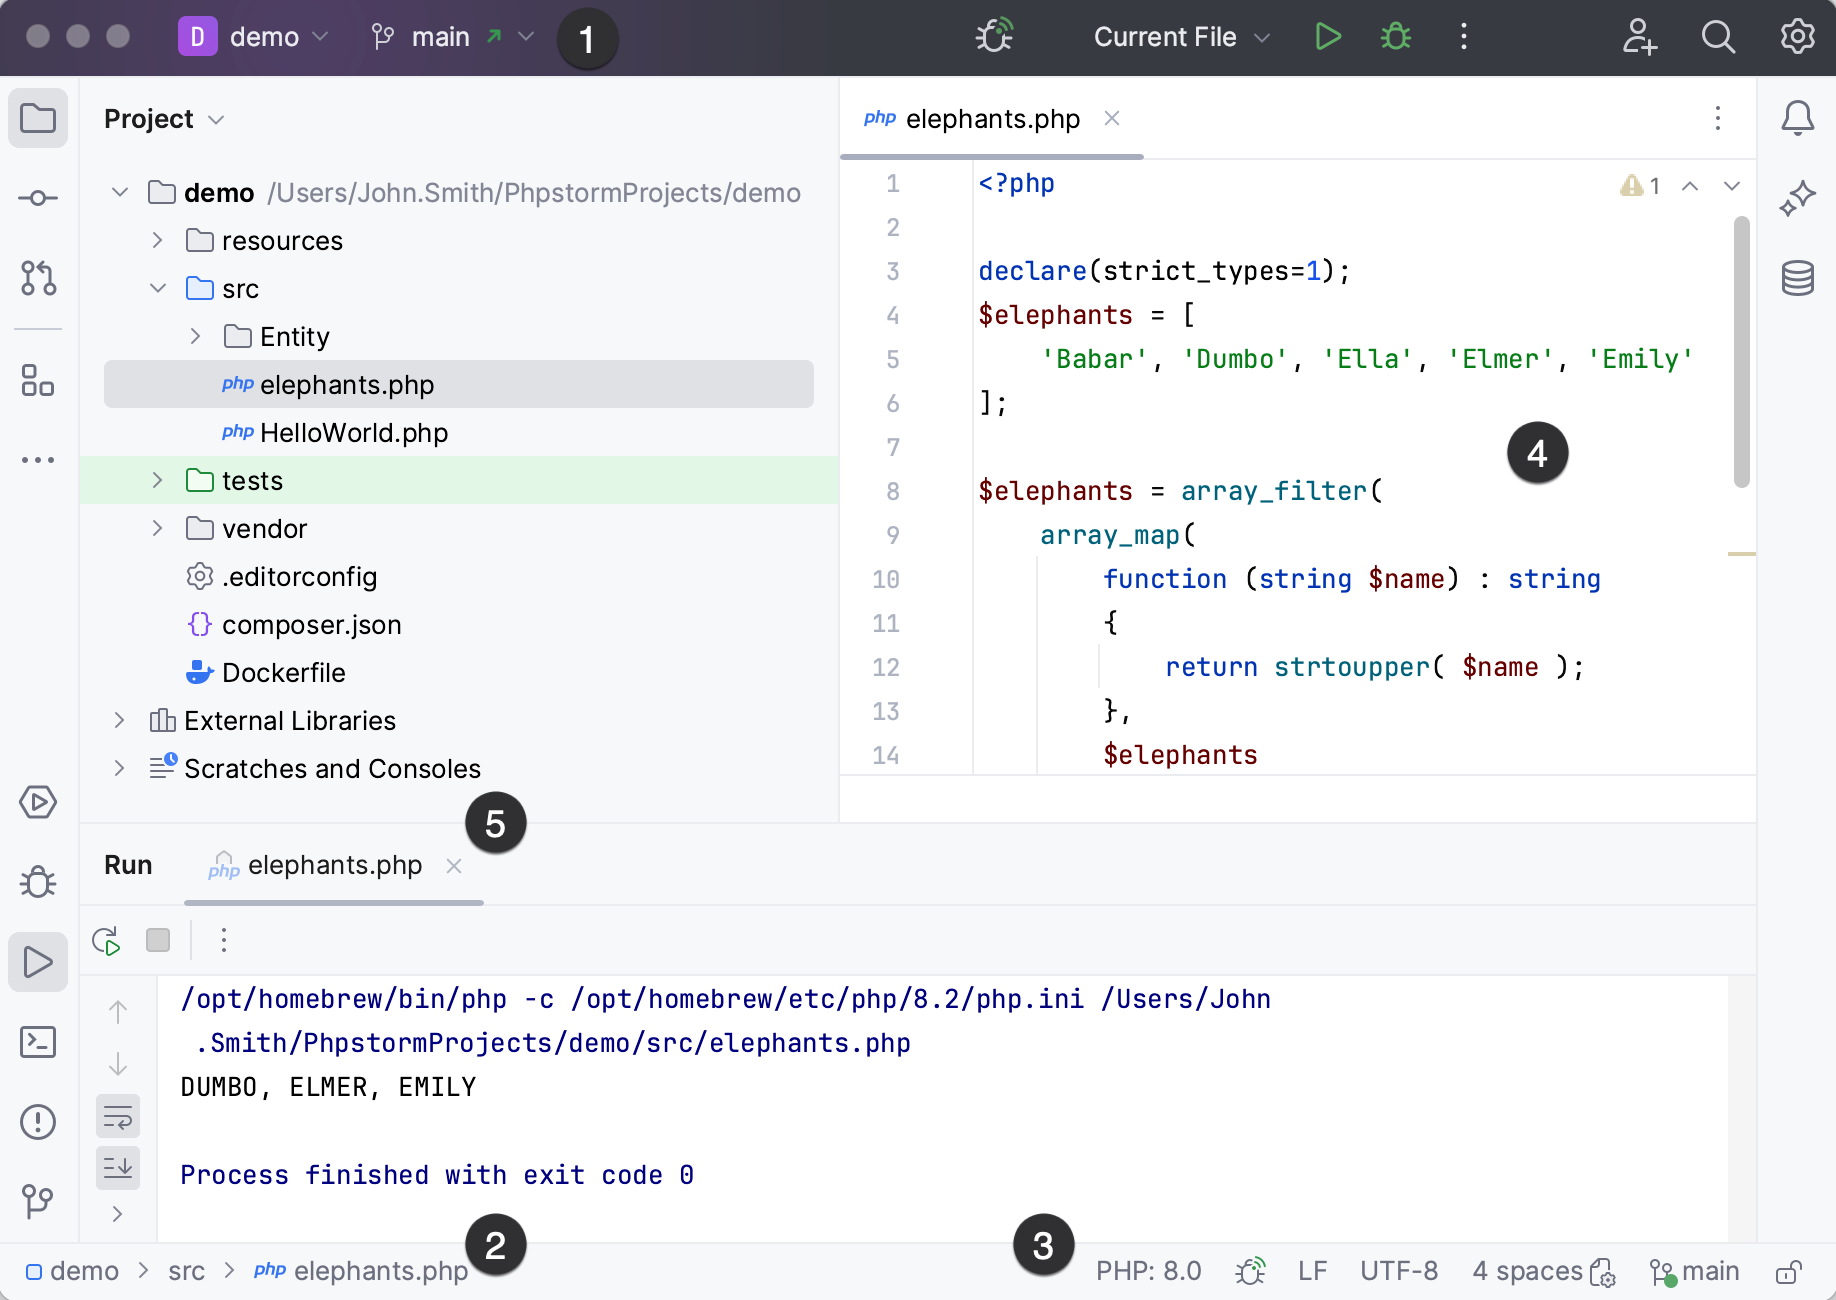 PhpStorm user interface overview